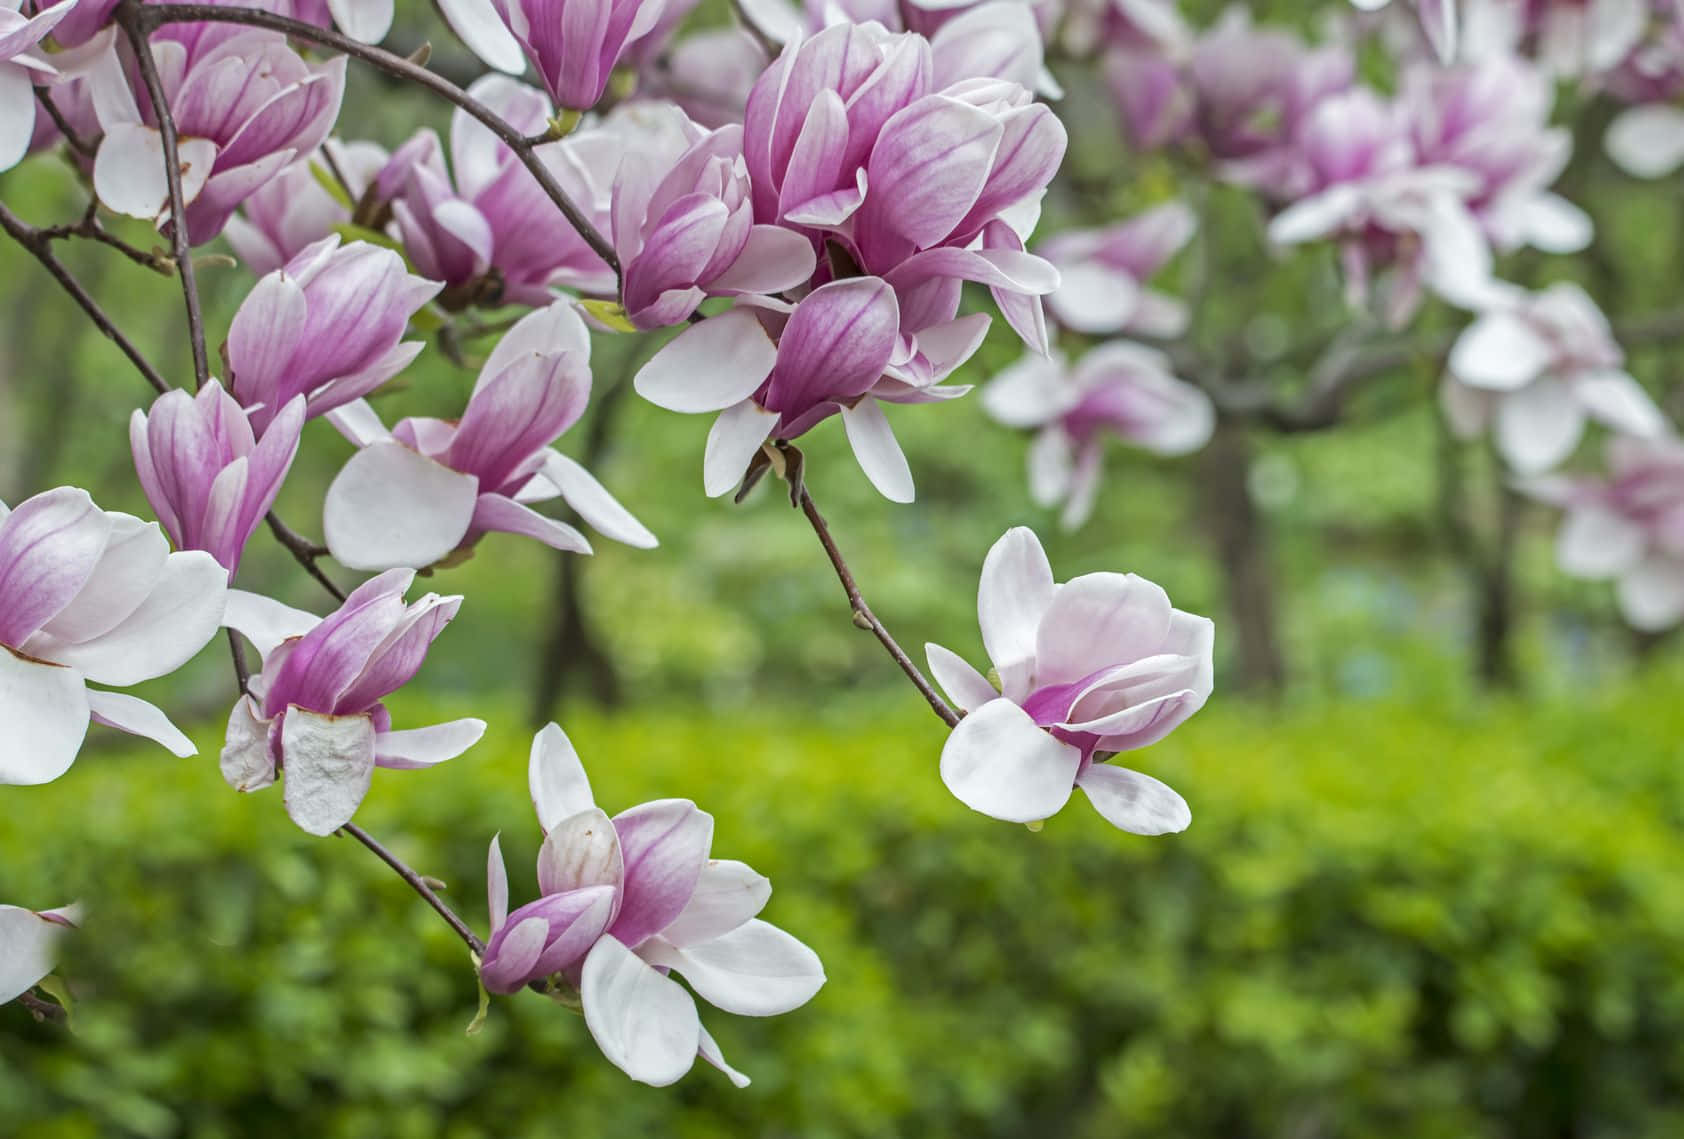 The magnificence of the Tulip Tree